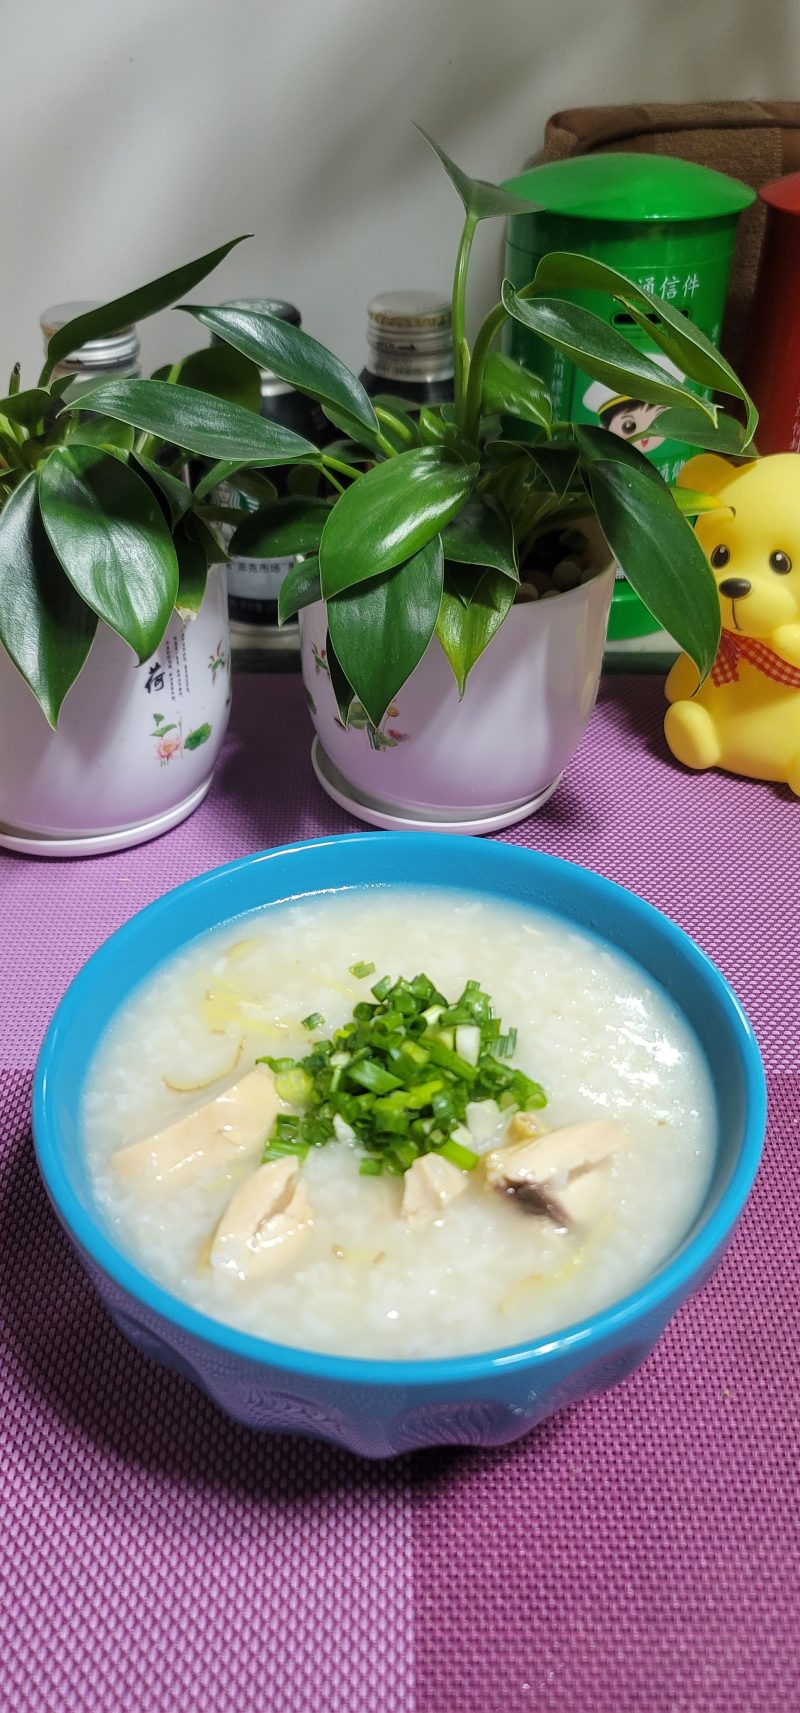 Steps to Make Salted Chicken Congee